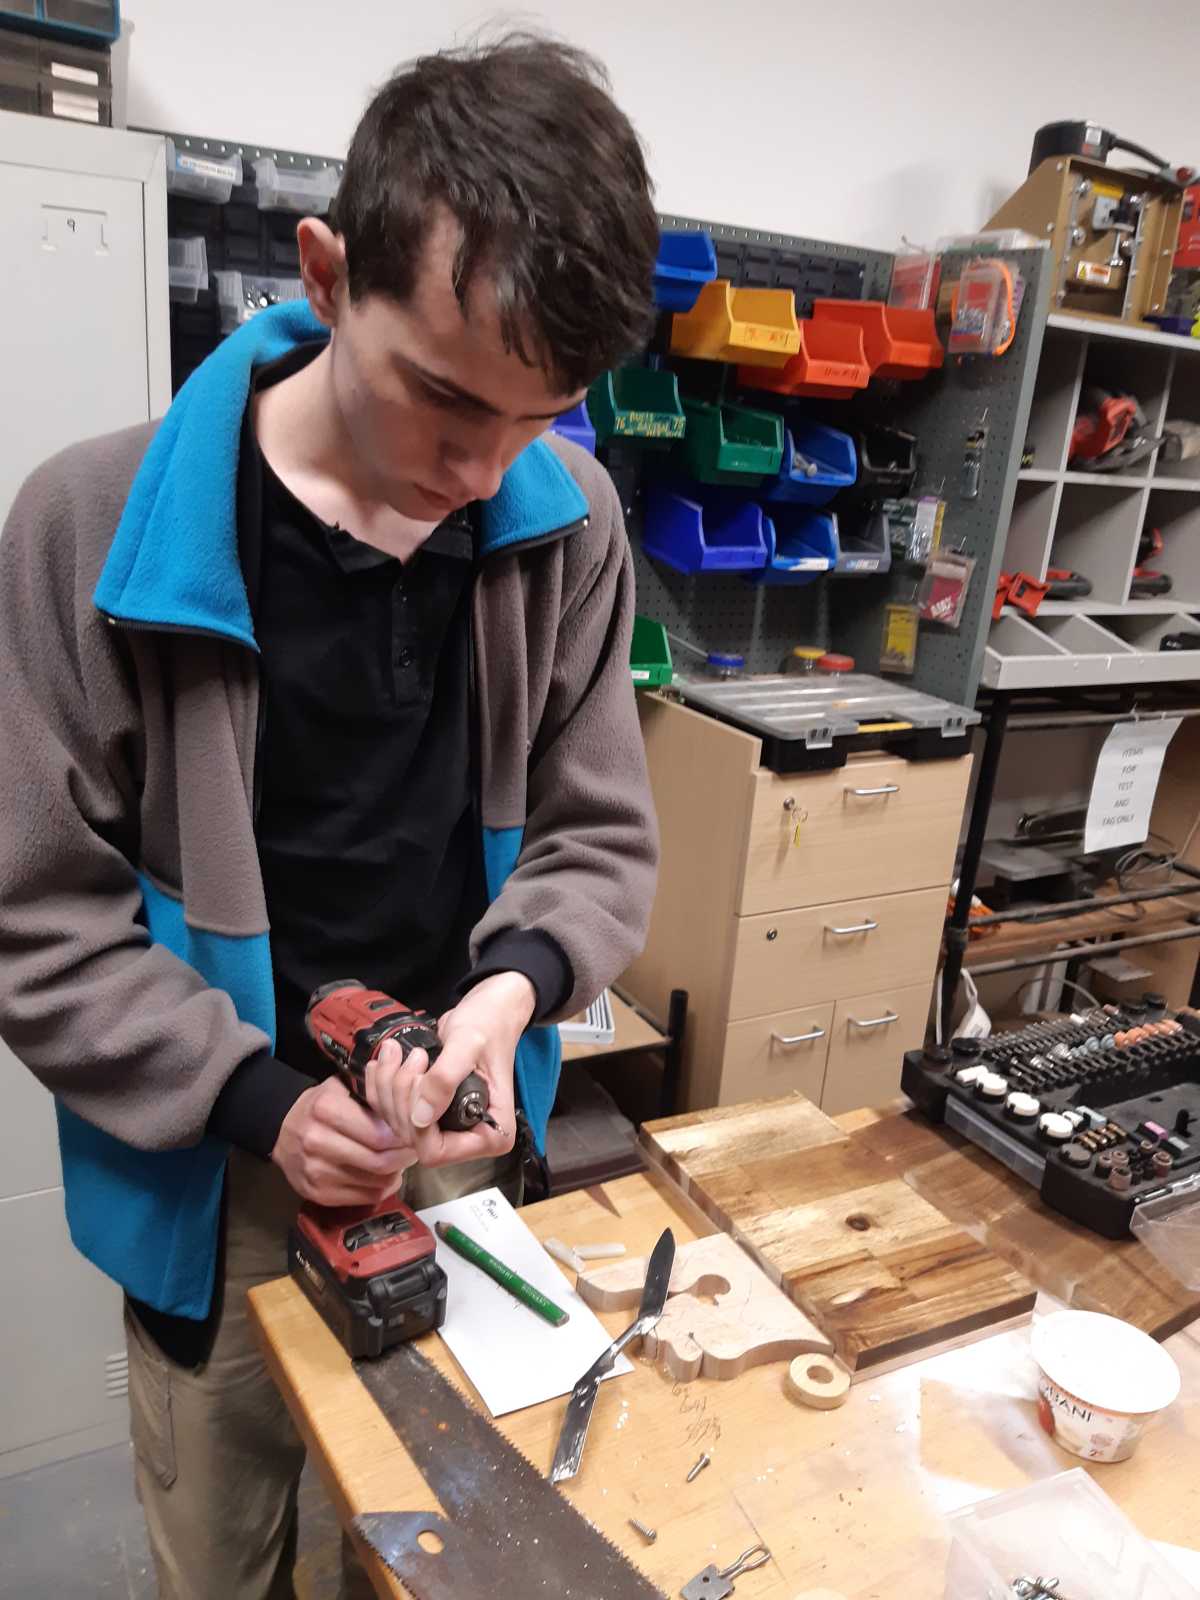 Sam in the Men's Shed holding a drill.